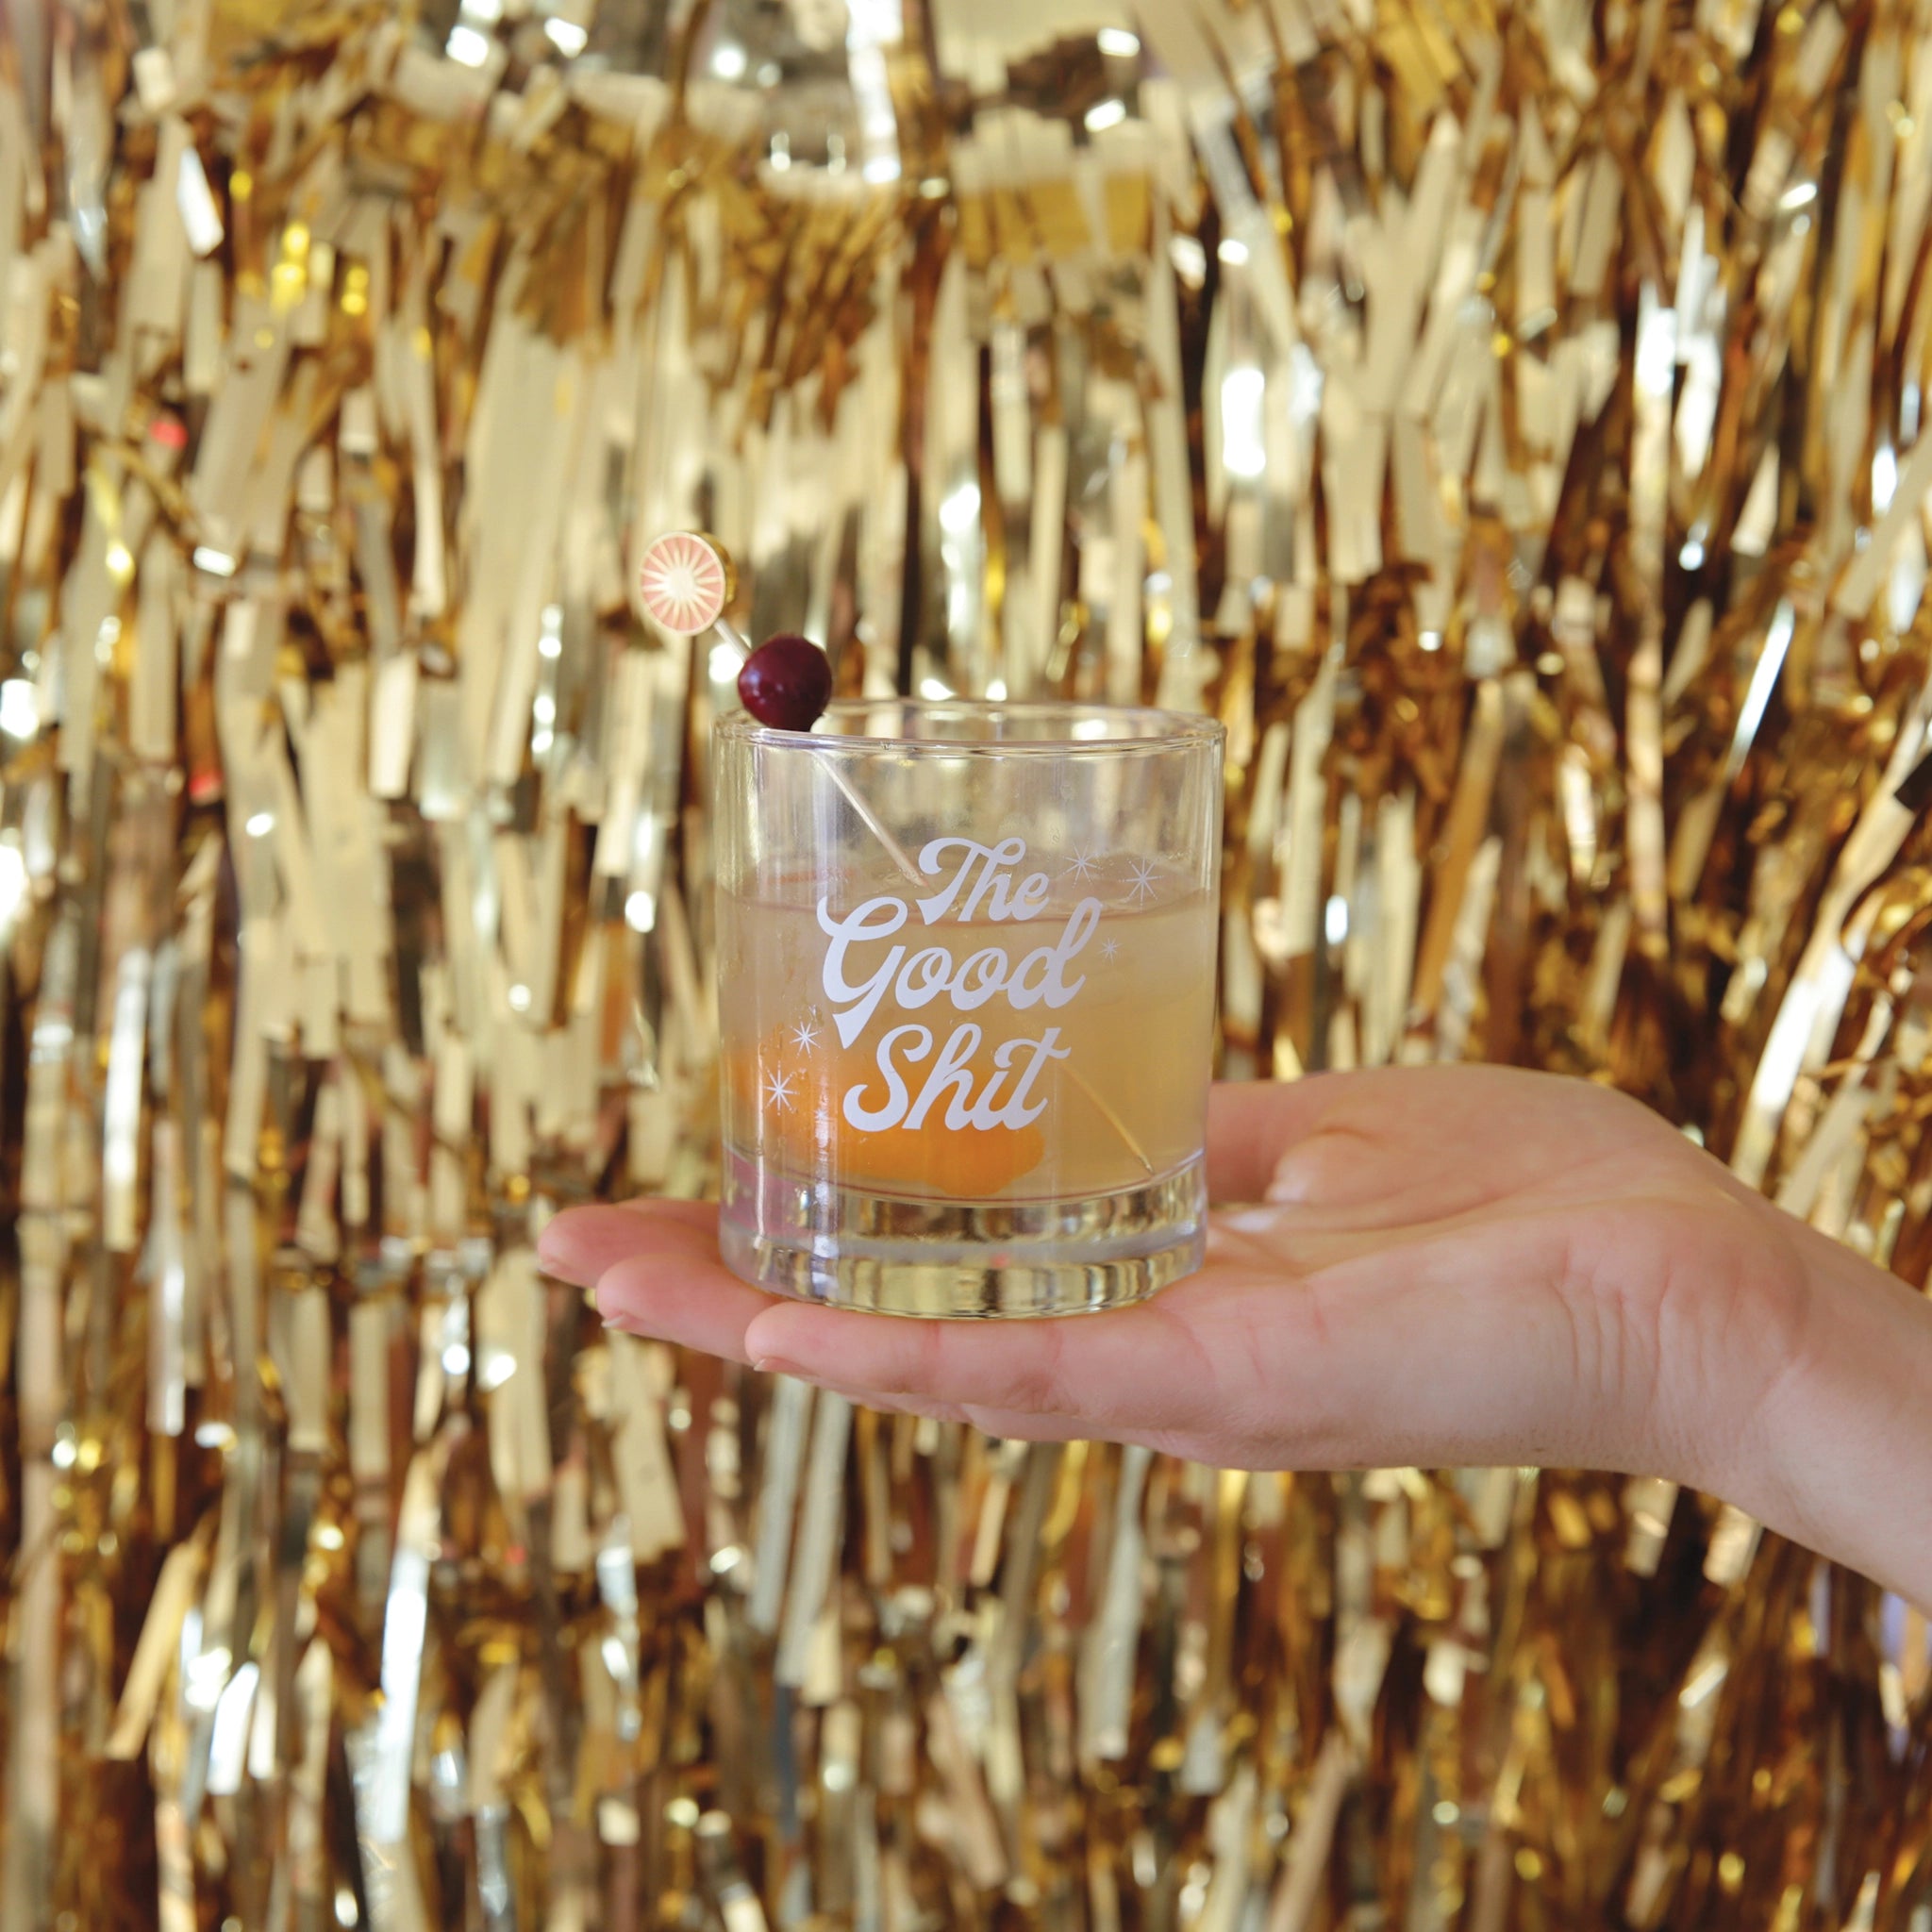 Against a gold tinsel backdrop is a photograph of a short glass tumbler with a thick bottom and &quot;The Good Shit&quot; printed across the center in white groovy cursive text.